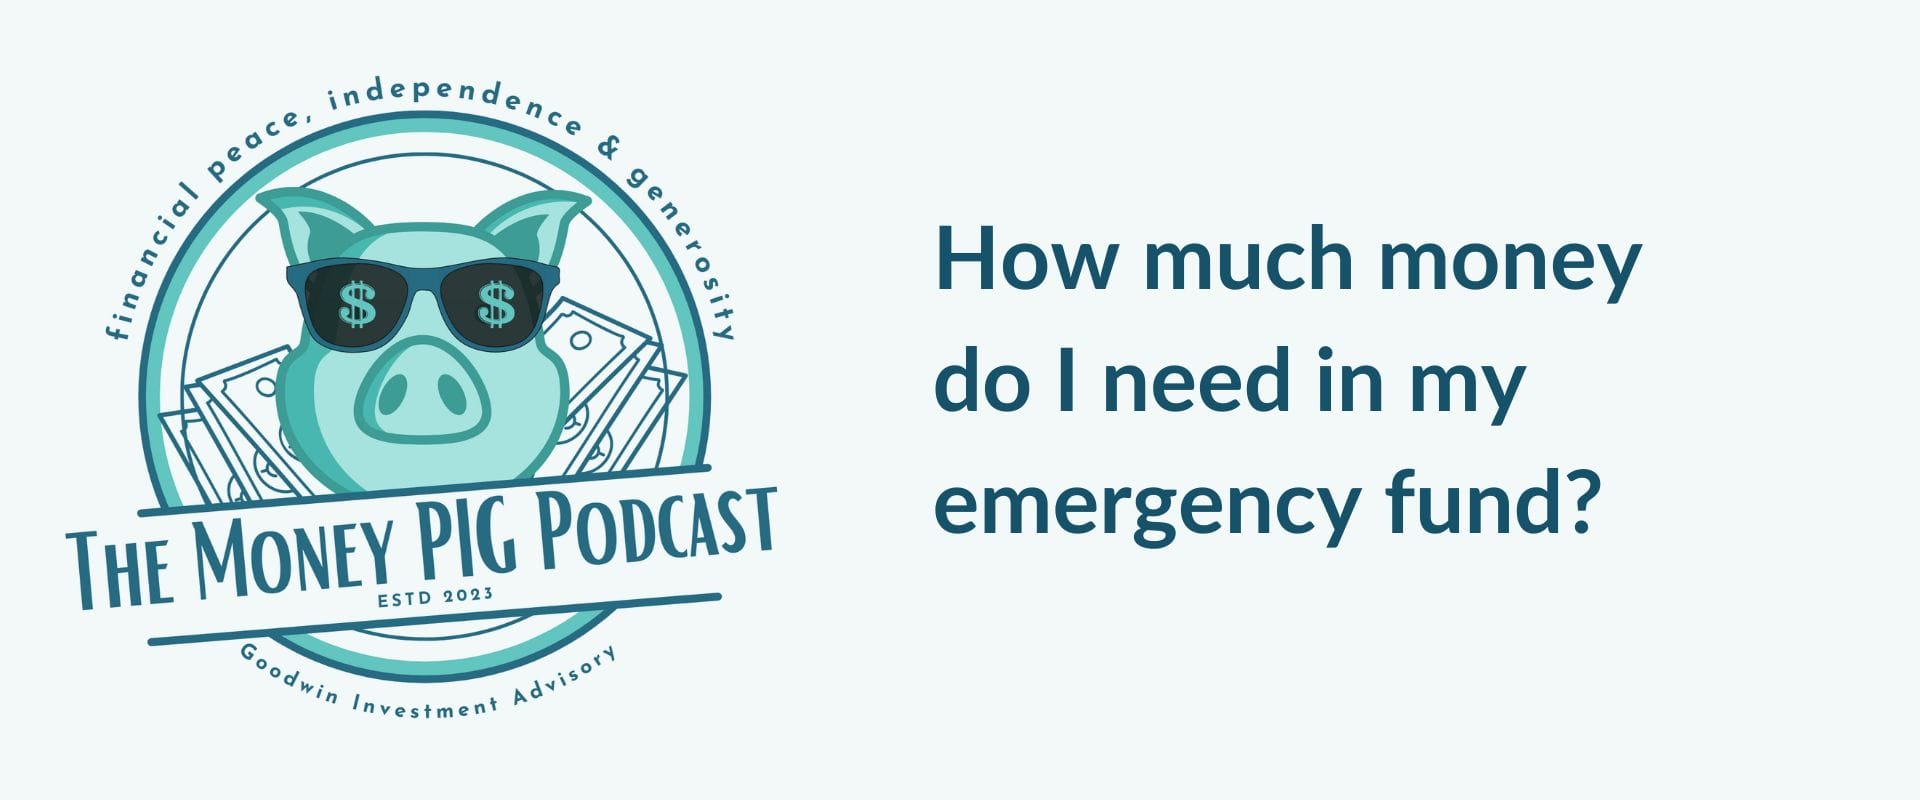 Episode 59 - How much money do I need in my emergency fund